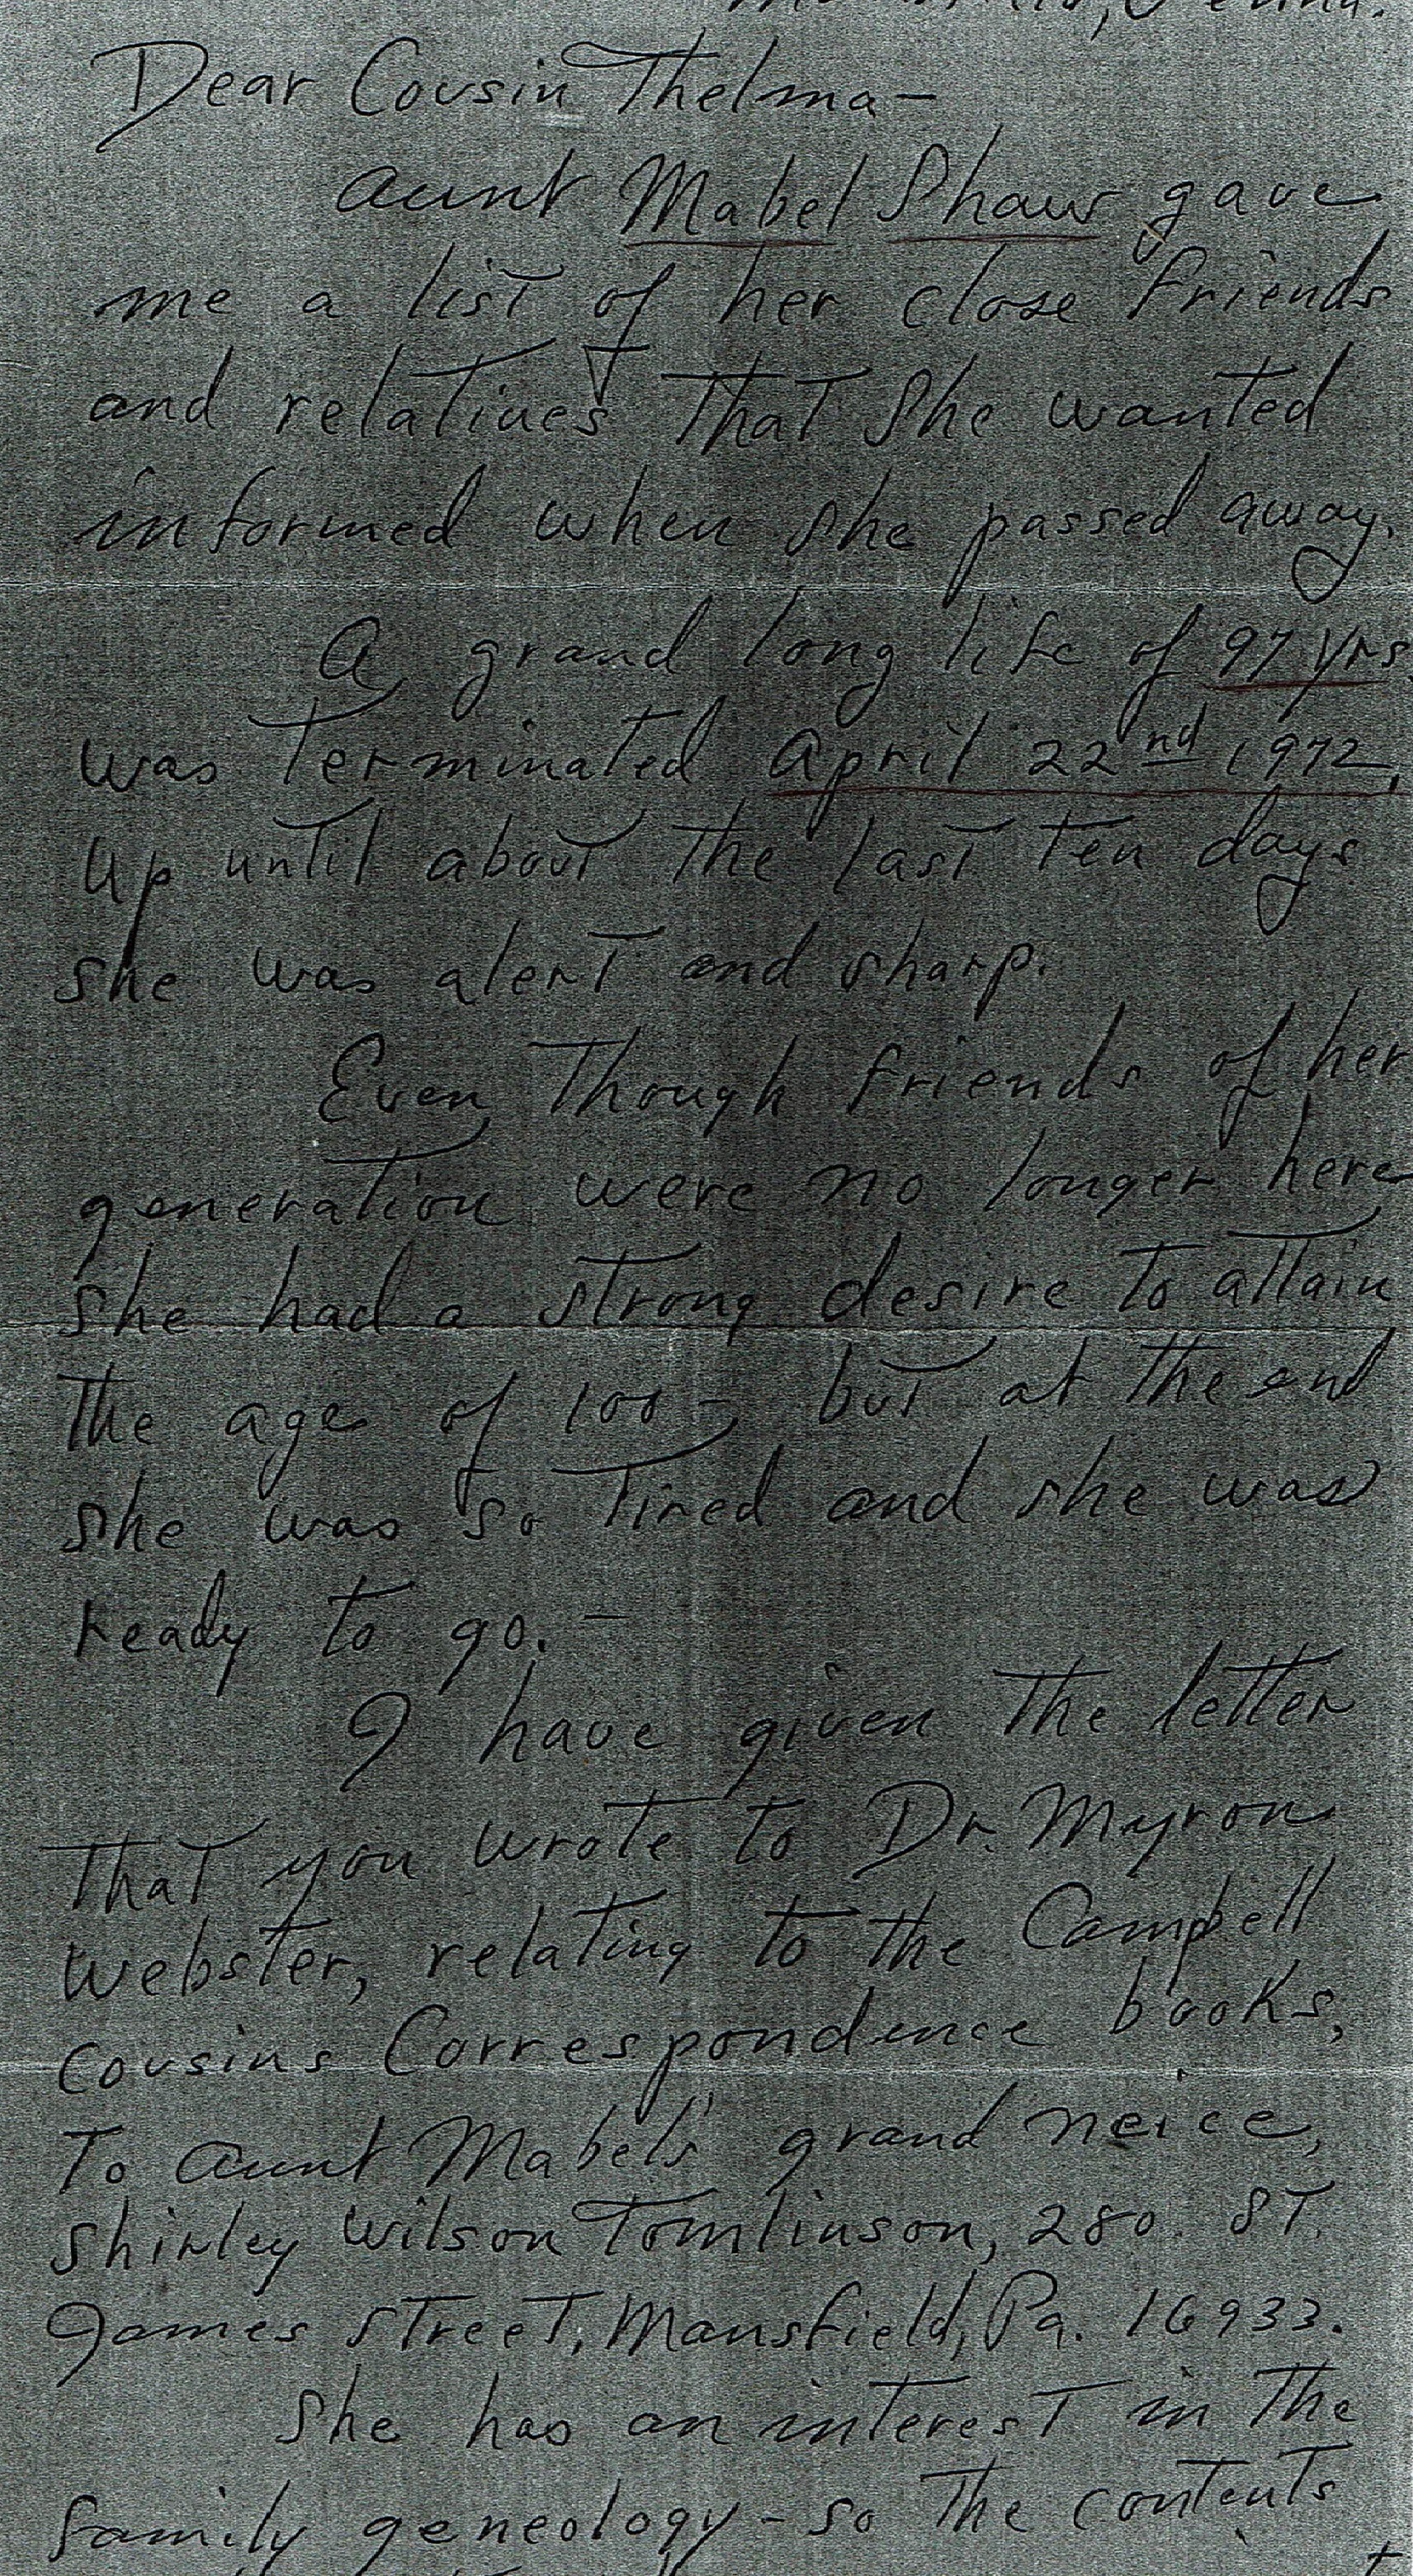 Image of a 1972 letter from George Robert Wilson to Thelma ELLISON Huyett